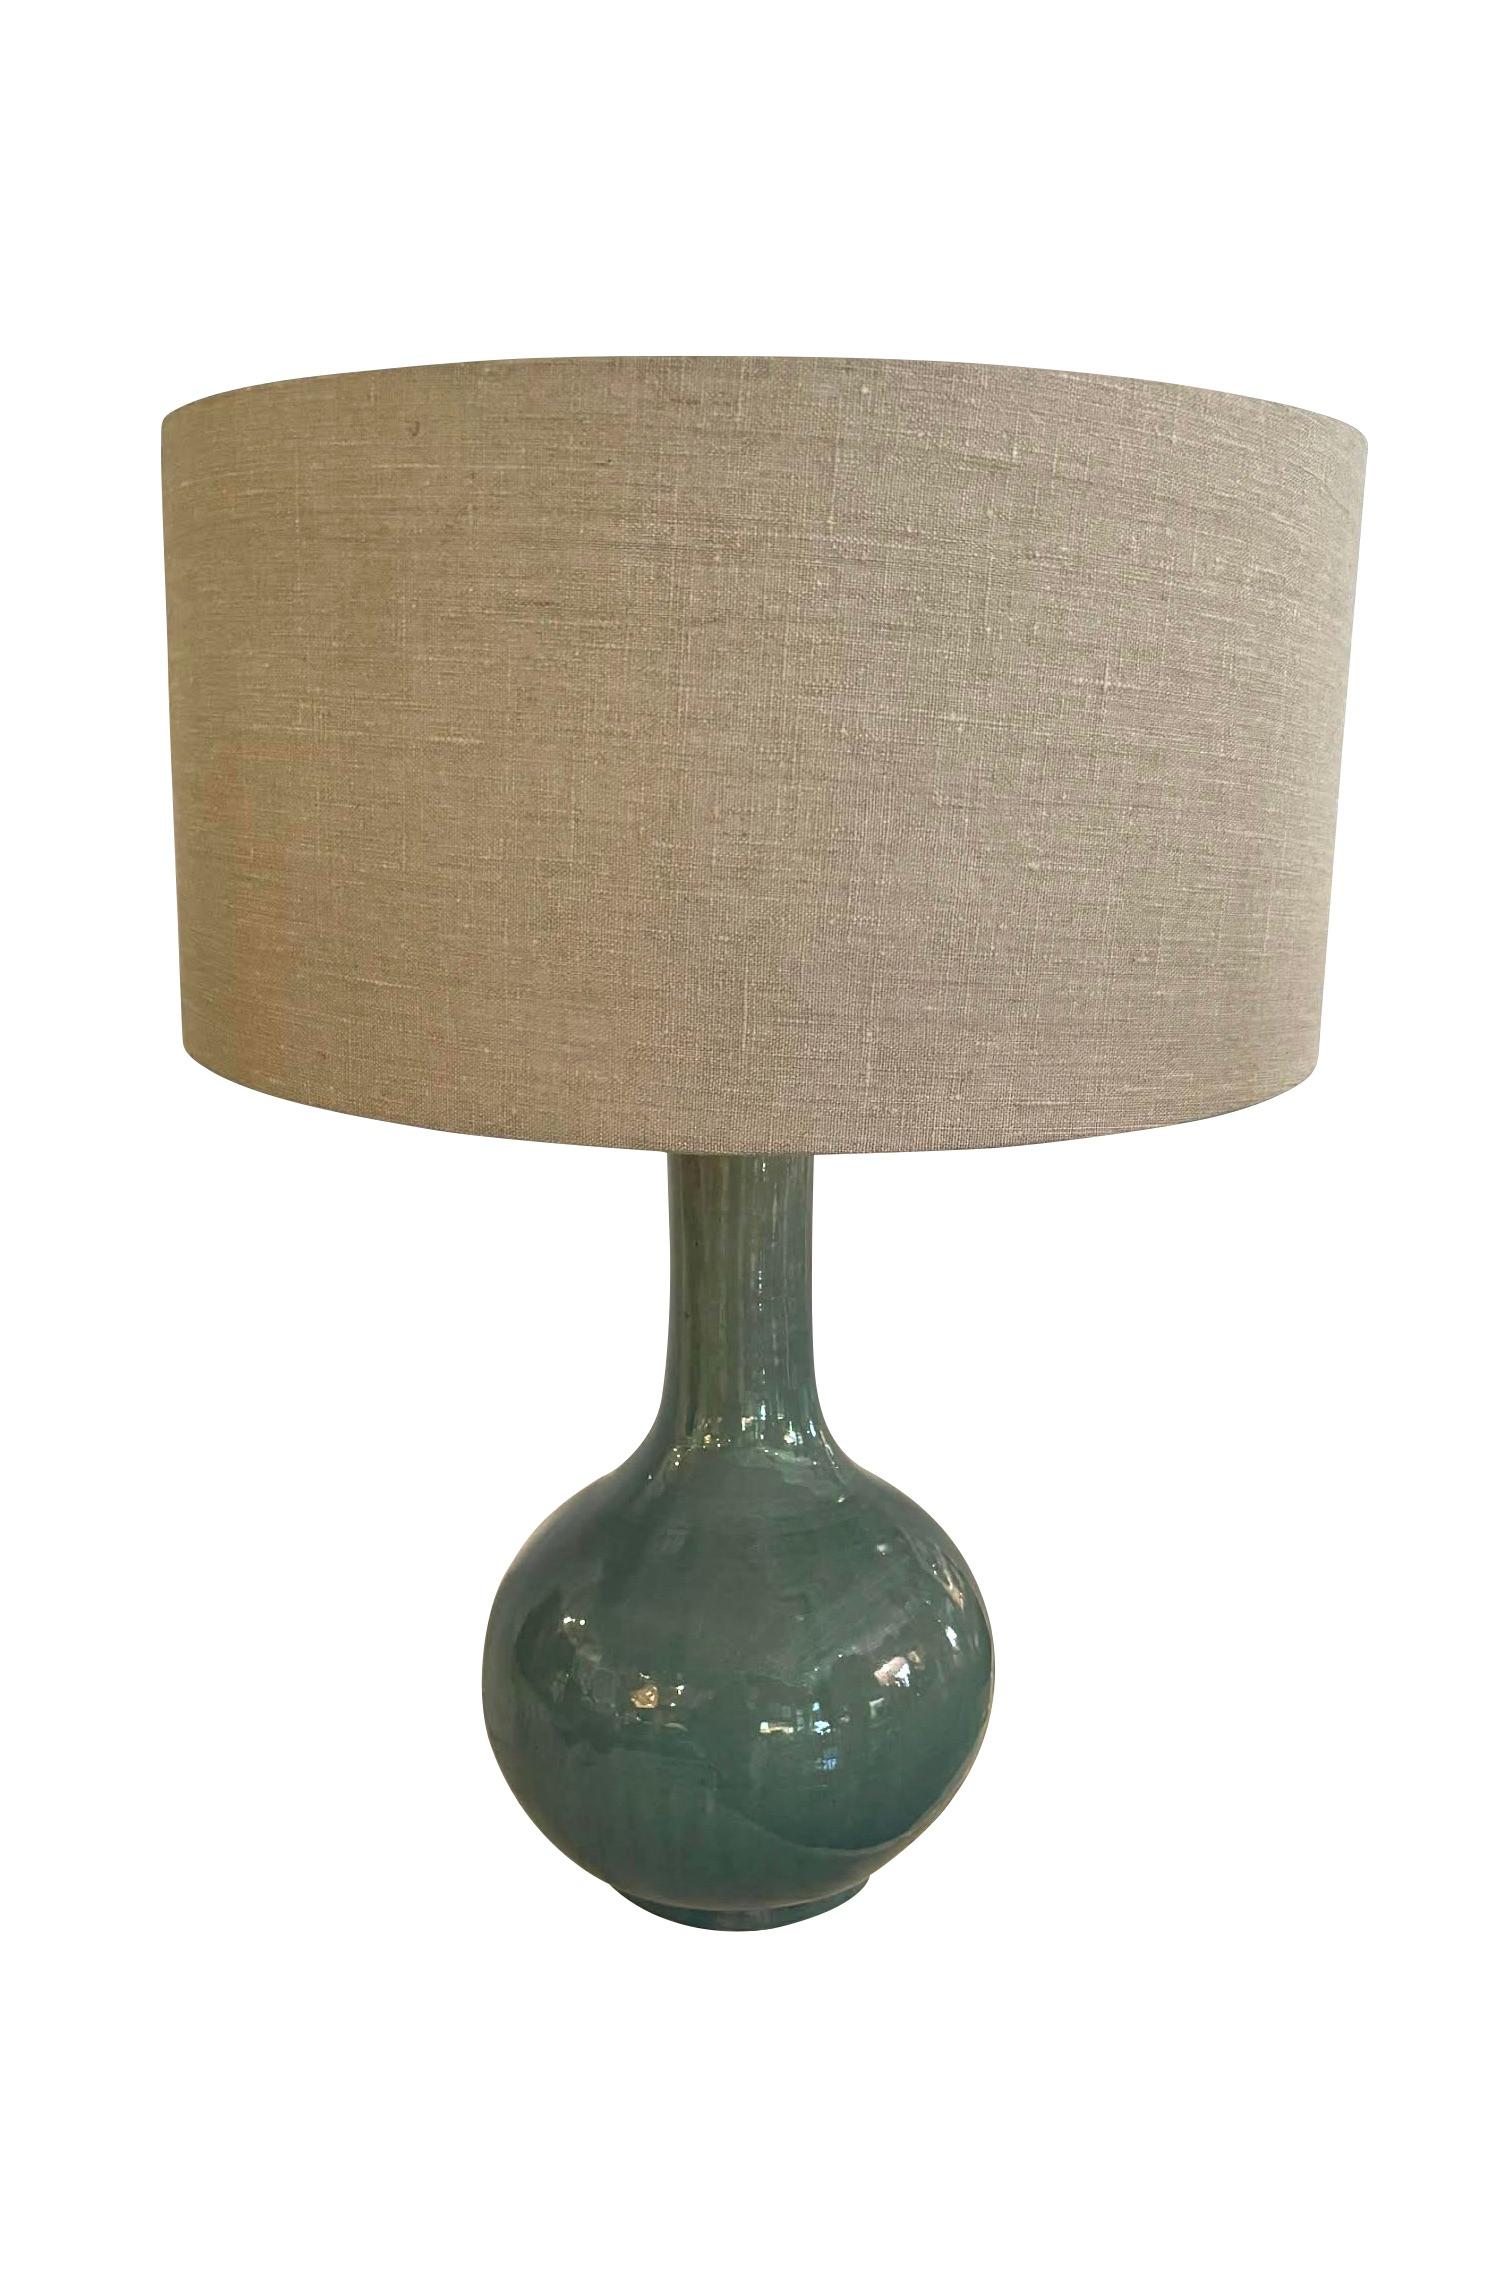 Contemporary Chinese pair of funnel neck washed turquoise glazed lamps.
New Belgian linen shades diameter 19.5